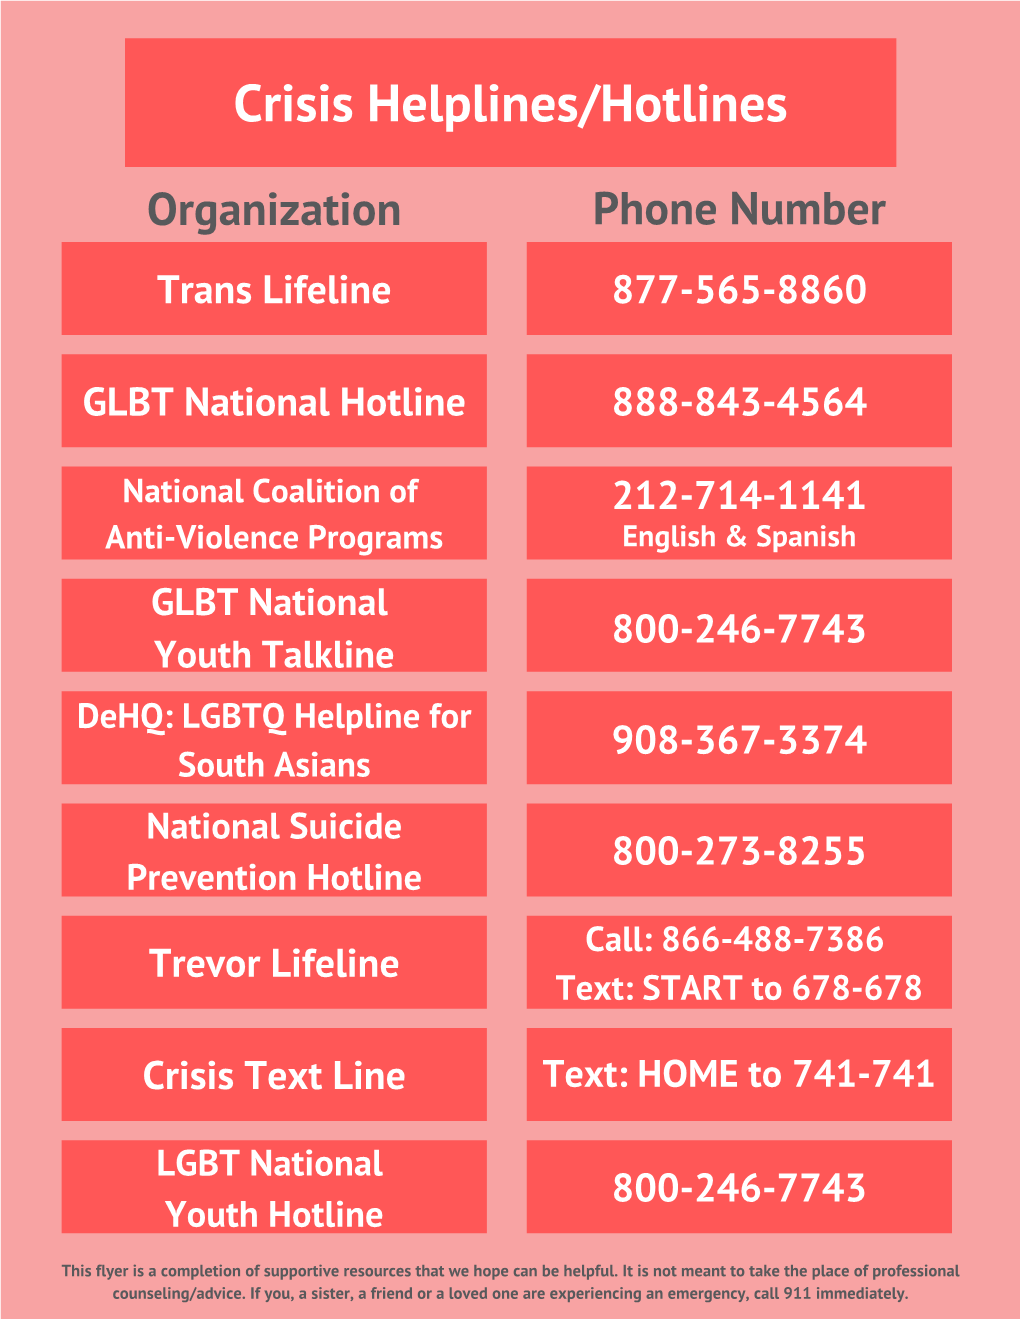 Crisis Help and Hotlines